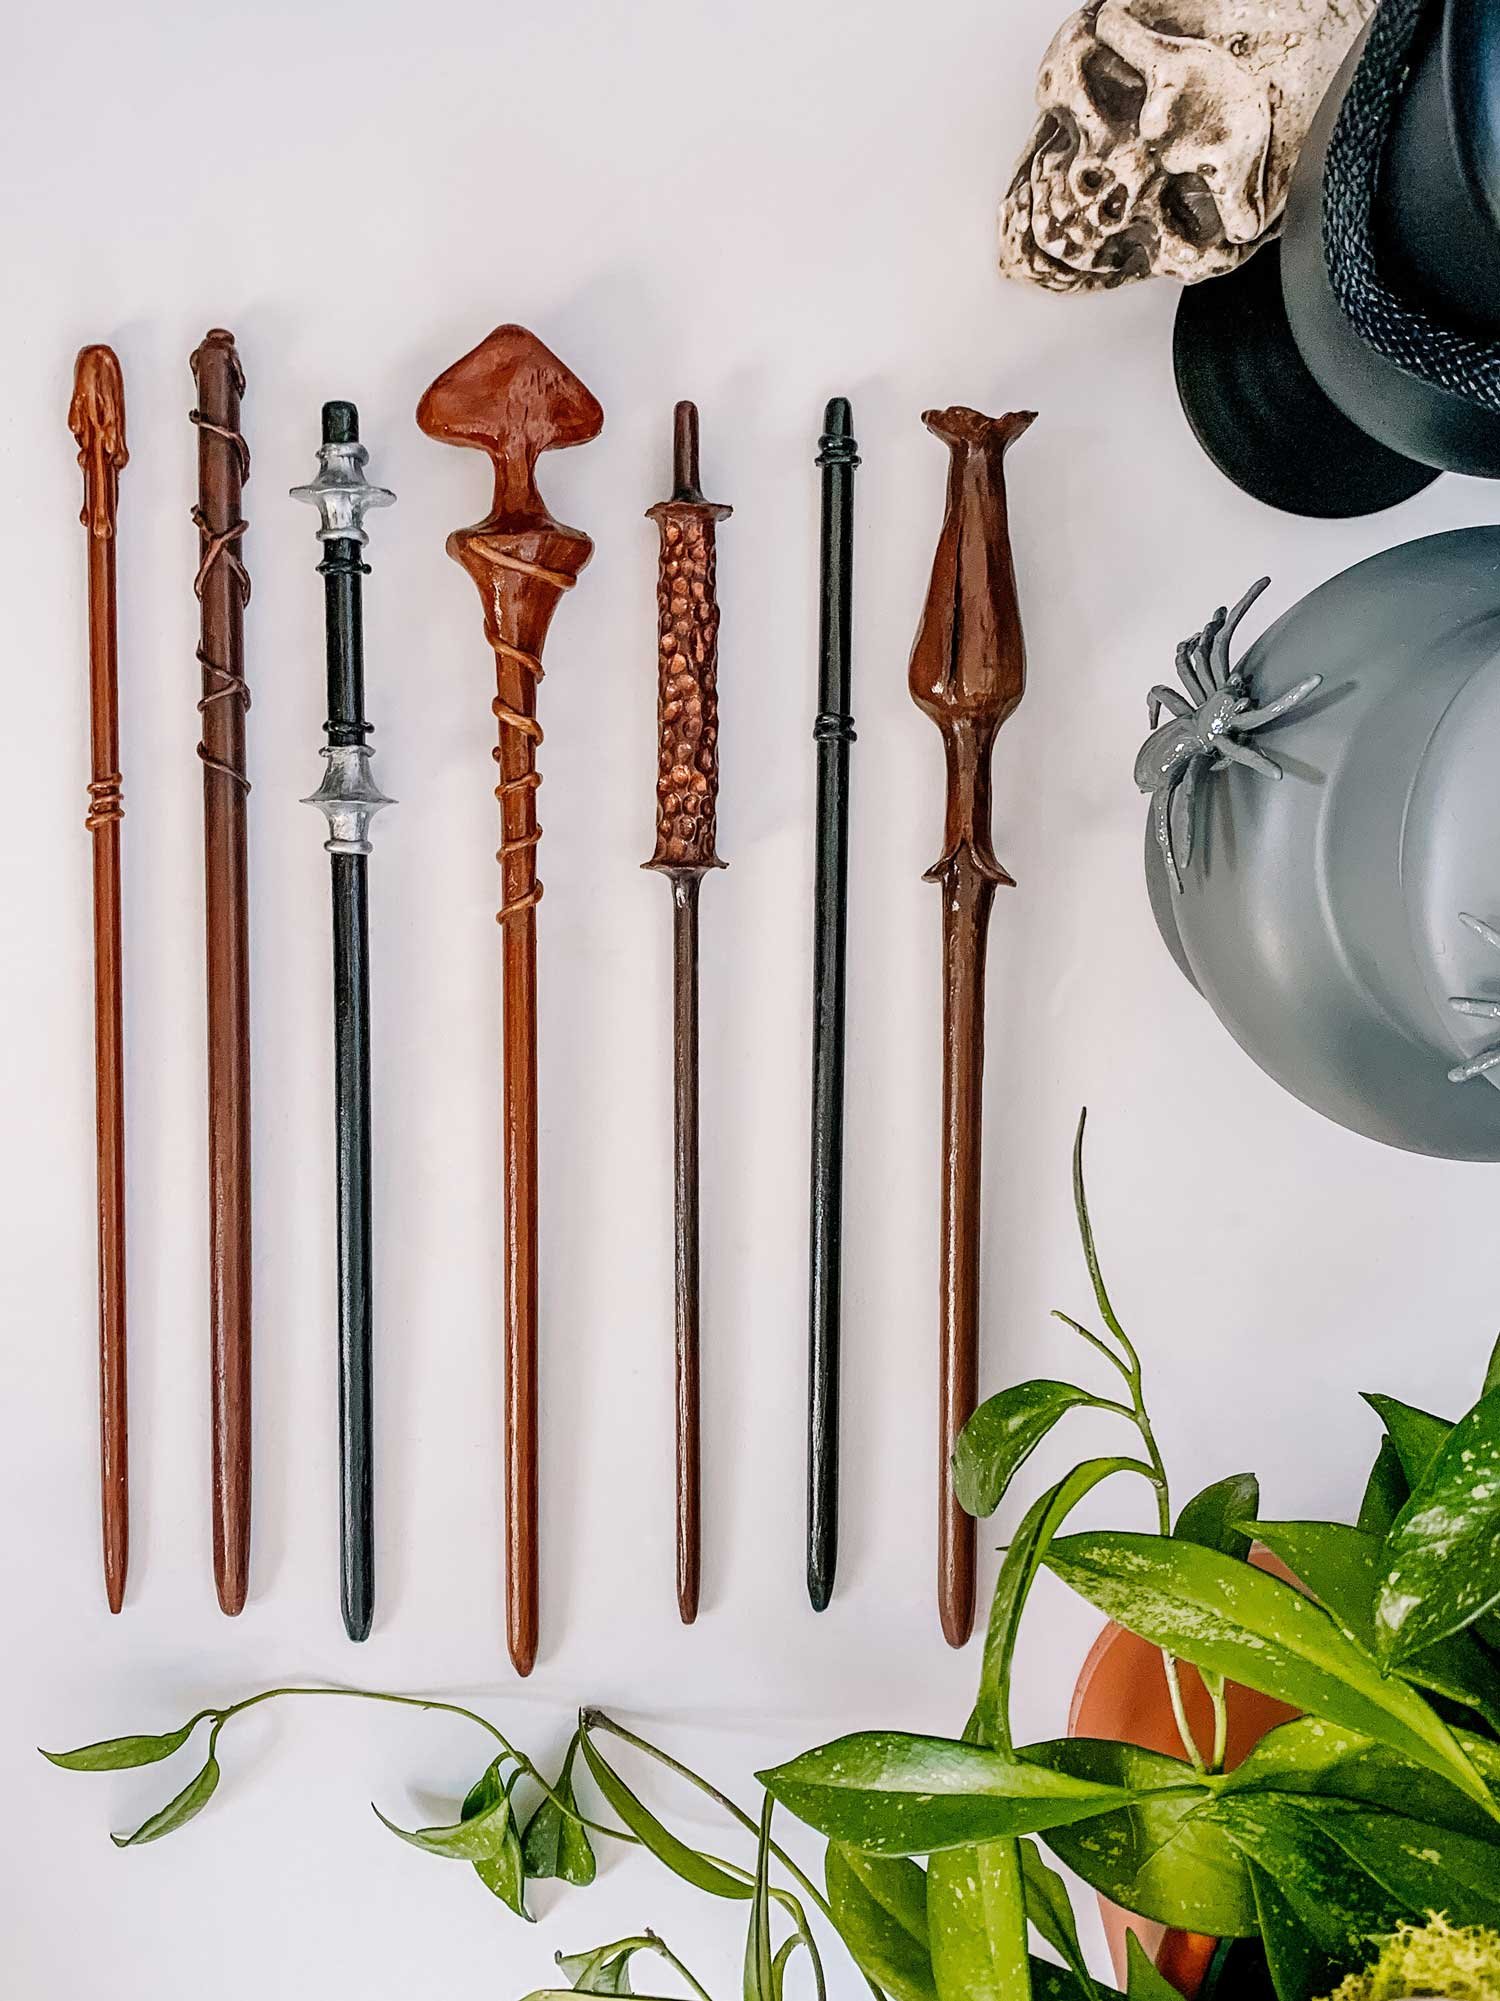  How to Make A Harry Potter Wand?